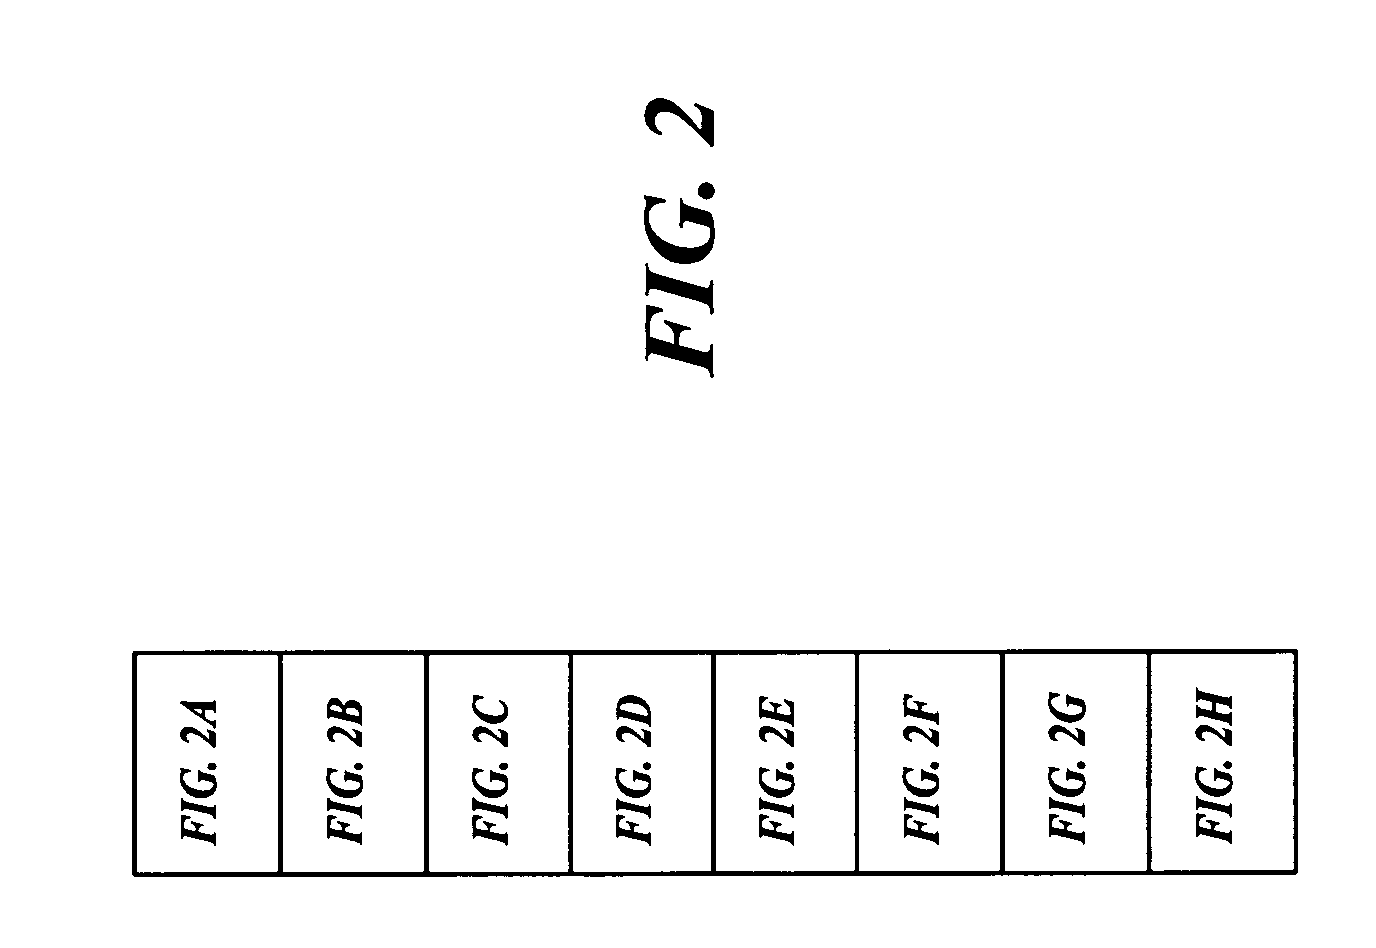 Methods and systems for analyzing flutter test data using non-linear transfer function frequency response fitting